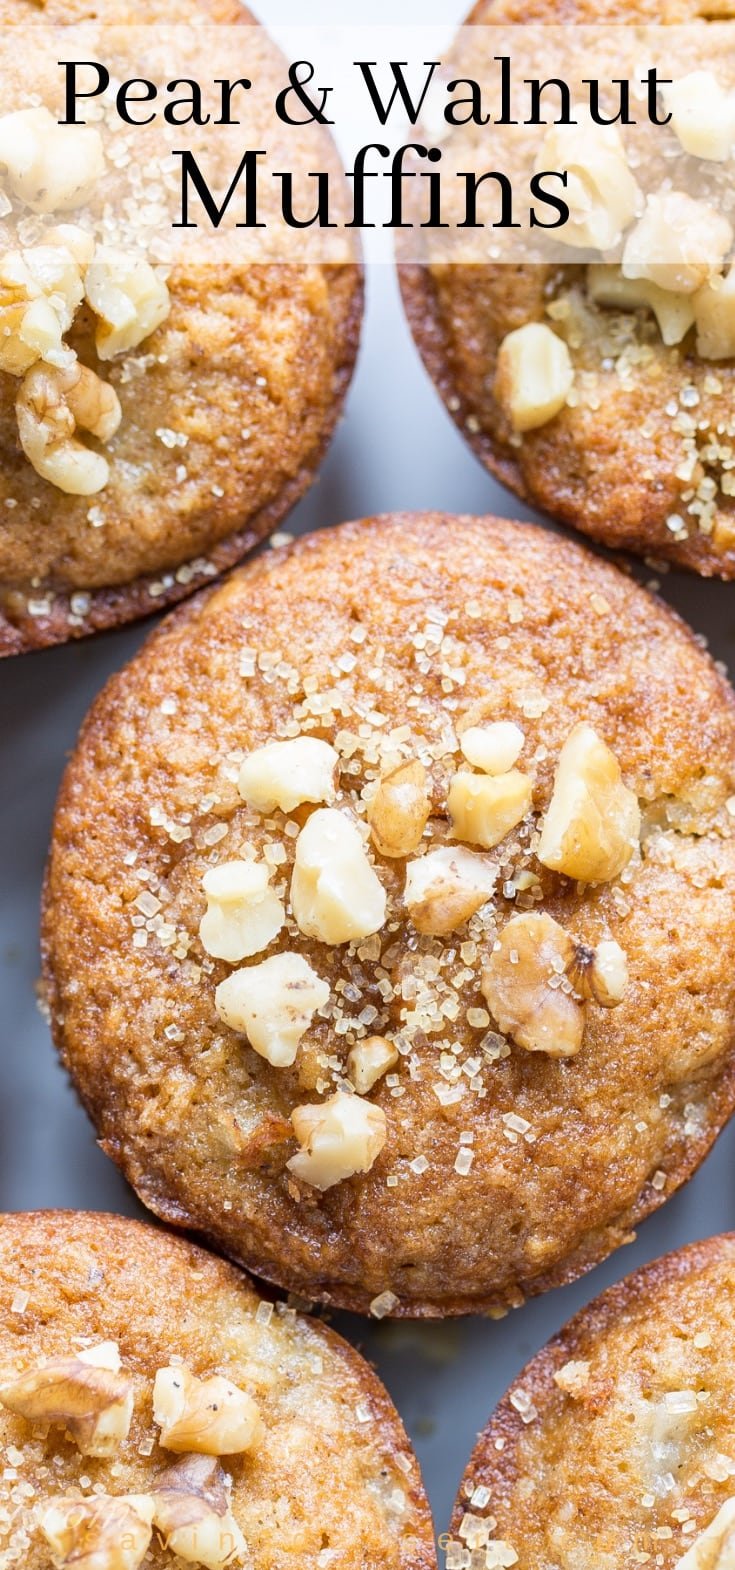 Close-up shot of Pear and Walnut Muffins sprinkled with coarse sugar and chopped walnuts